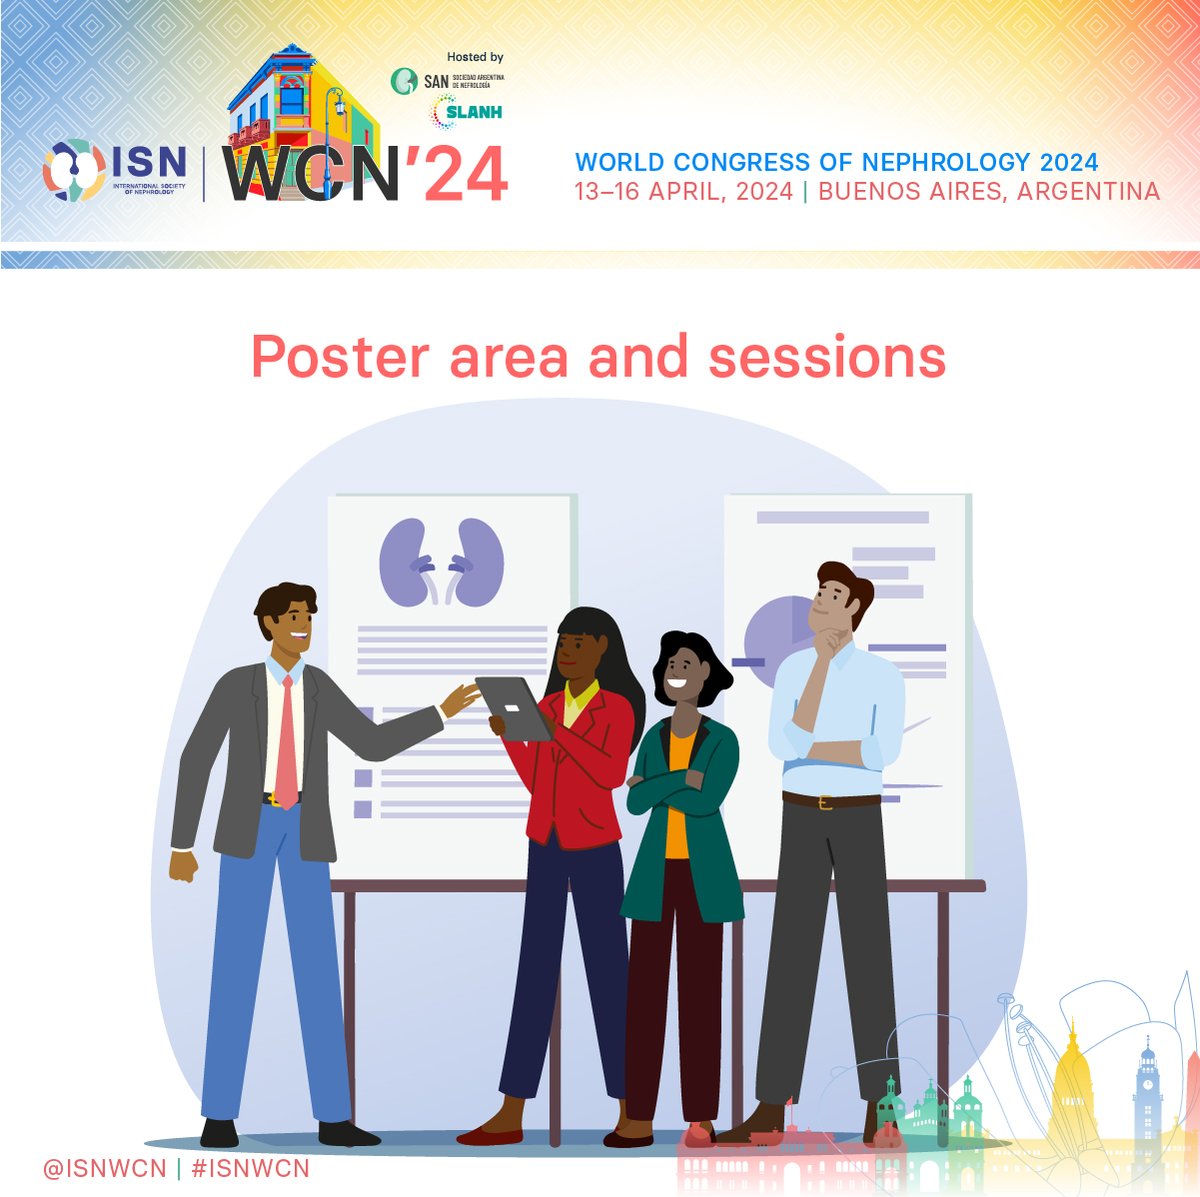 𝗦𝗧𝗔𝗥𝗧𝗜𝗡𝗚 𝗡𝗢𝗪: WCN'24 poster session 🕕 5:45 pm ART 📍 Exhibition Hall & Main Foyer All abstracts are available at the WCN'24 website ➡️ ow.ly/ikfw50Rcvsv and some are transformed into visual abstracts by the #ISNWCN Social Media team